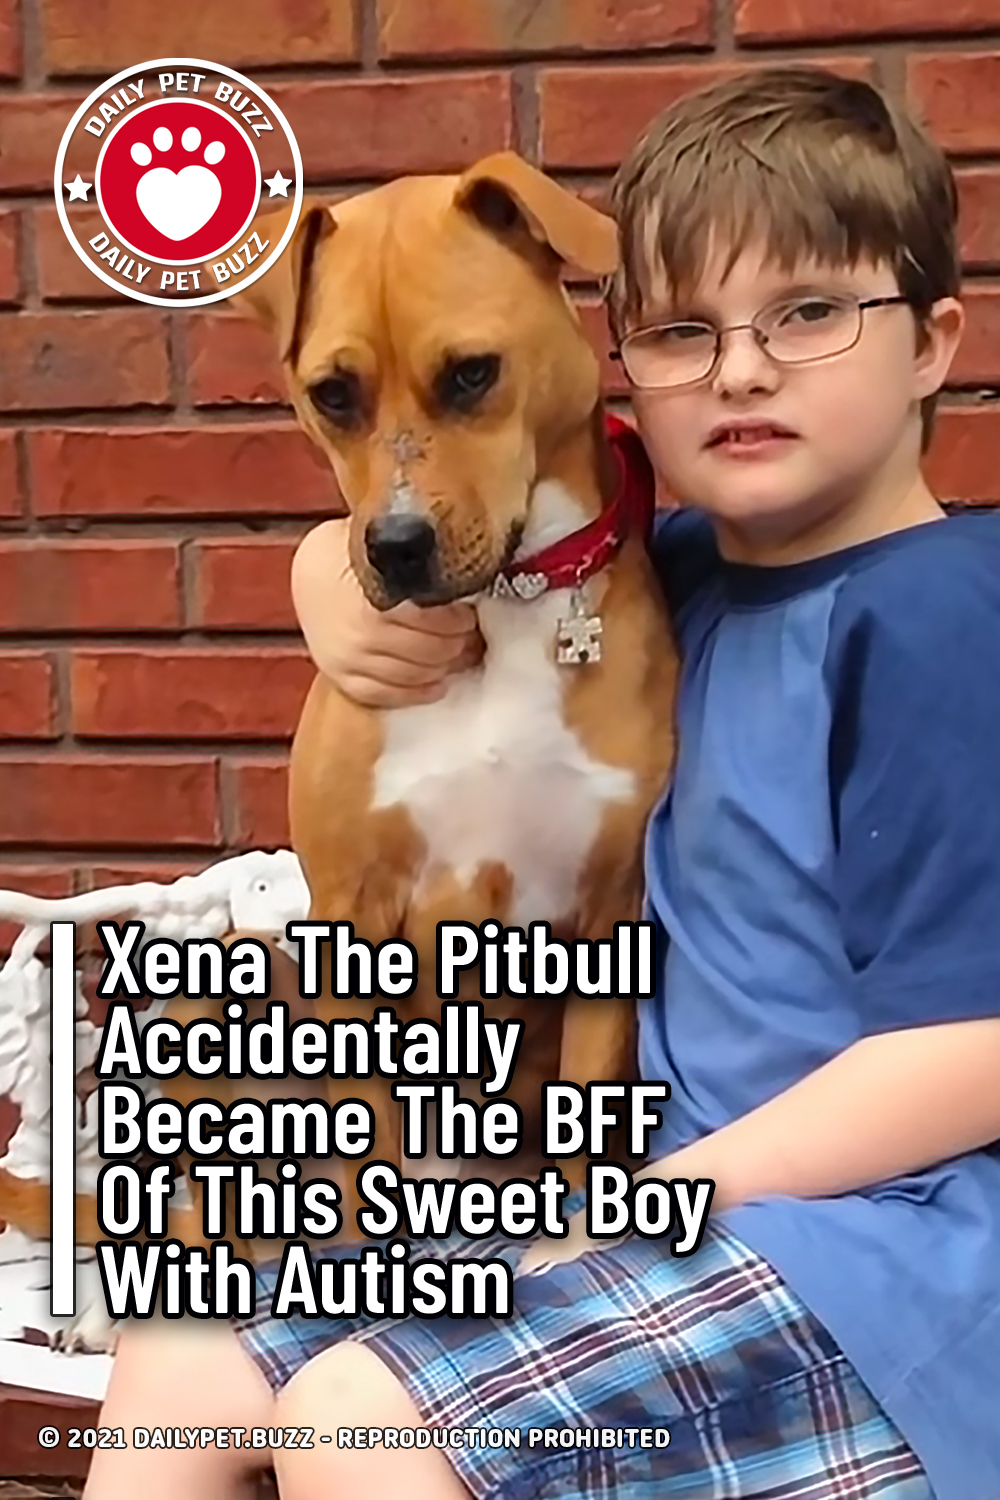 Xena The Pitbull Accidentally Became The BFF Of This Sweet Boy With Autism